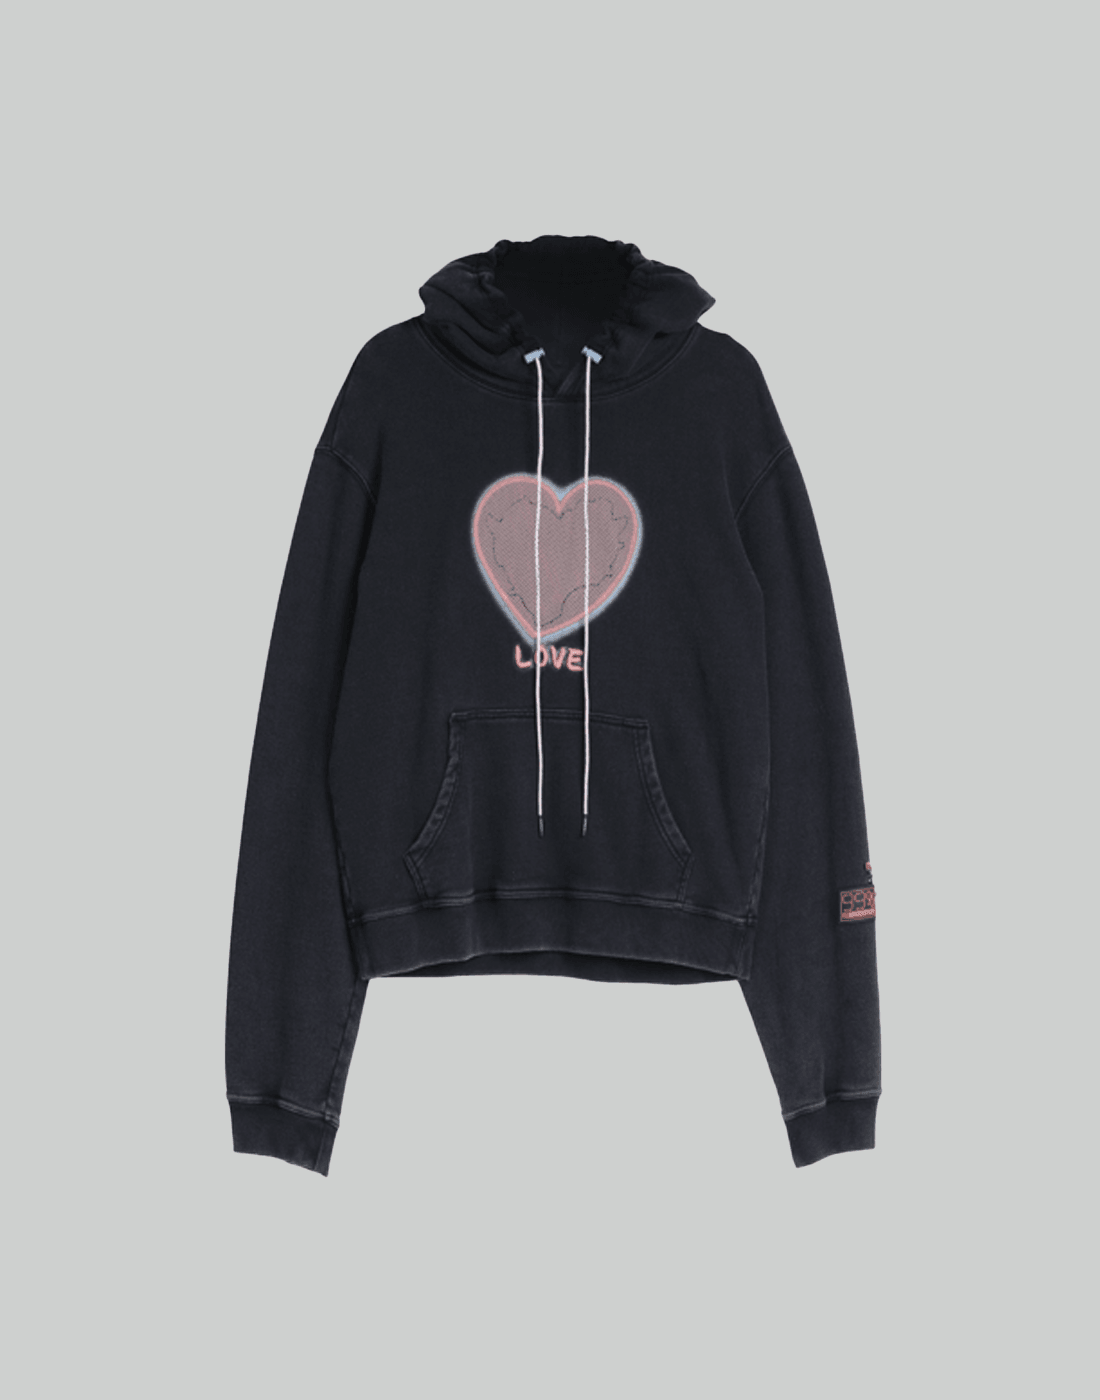 99%IS- "1%ove" Sex Washed Hoodie (Hand Made Custom) - 082plus